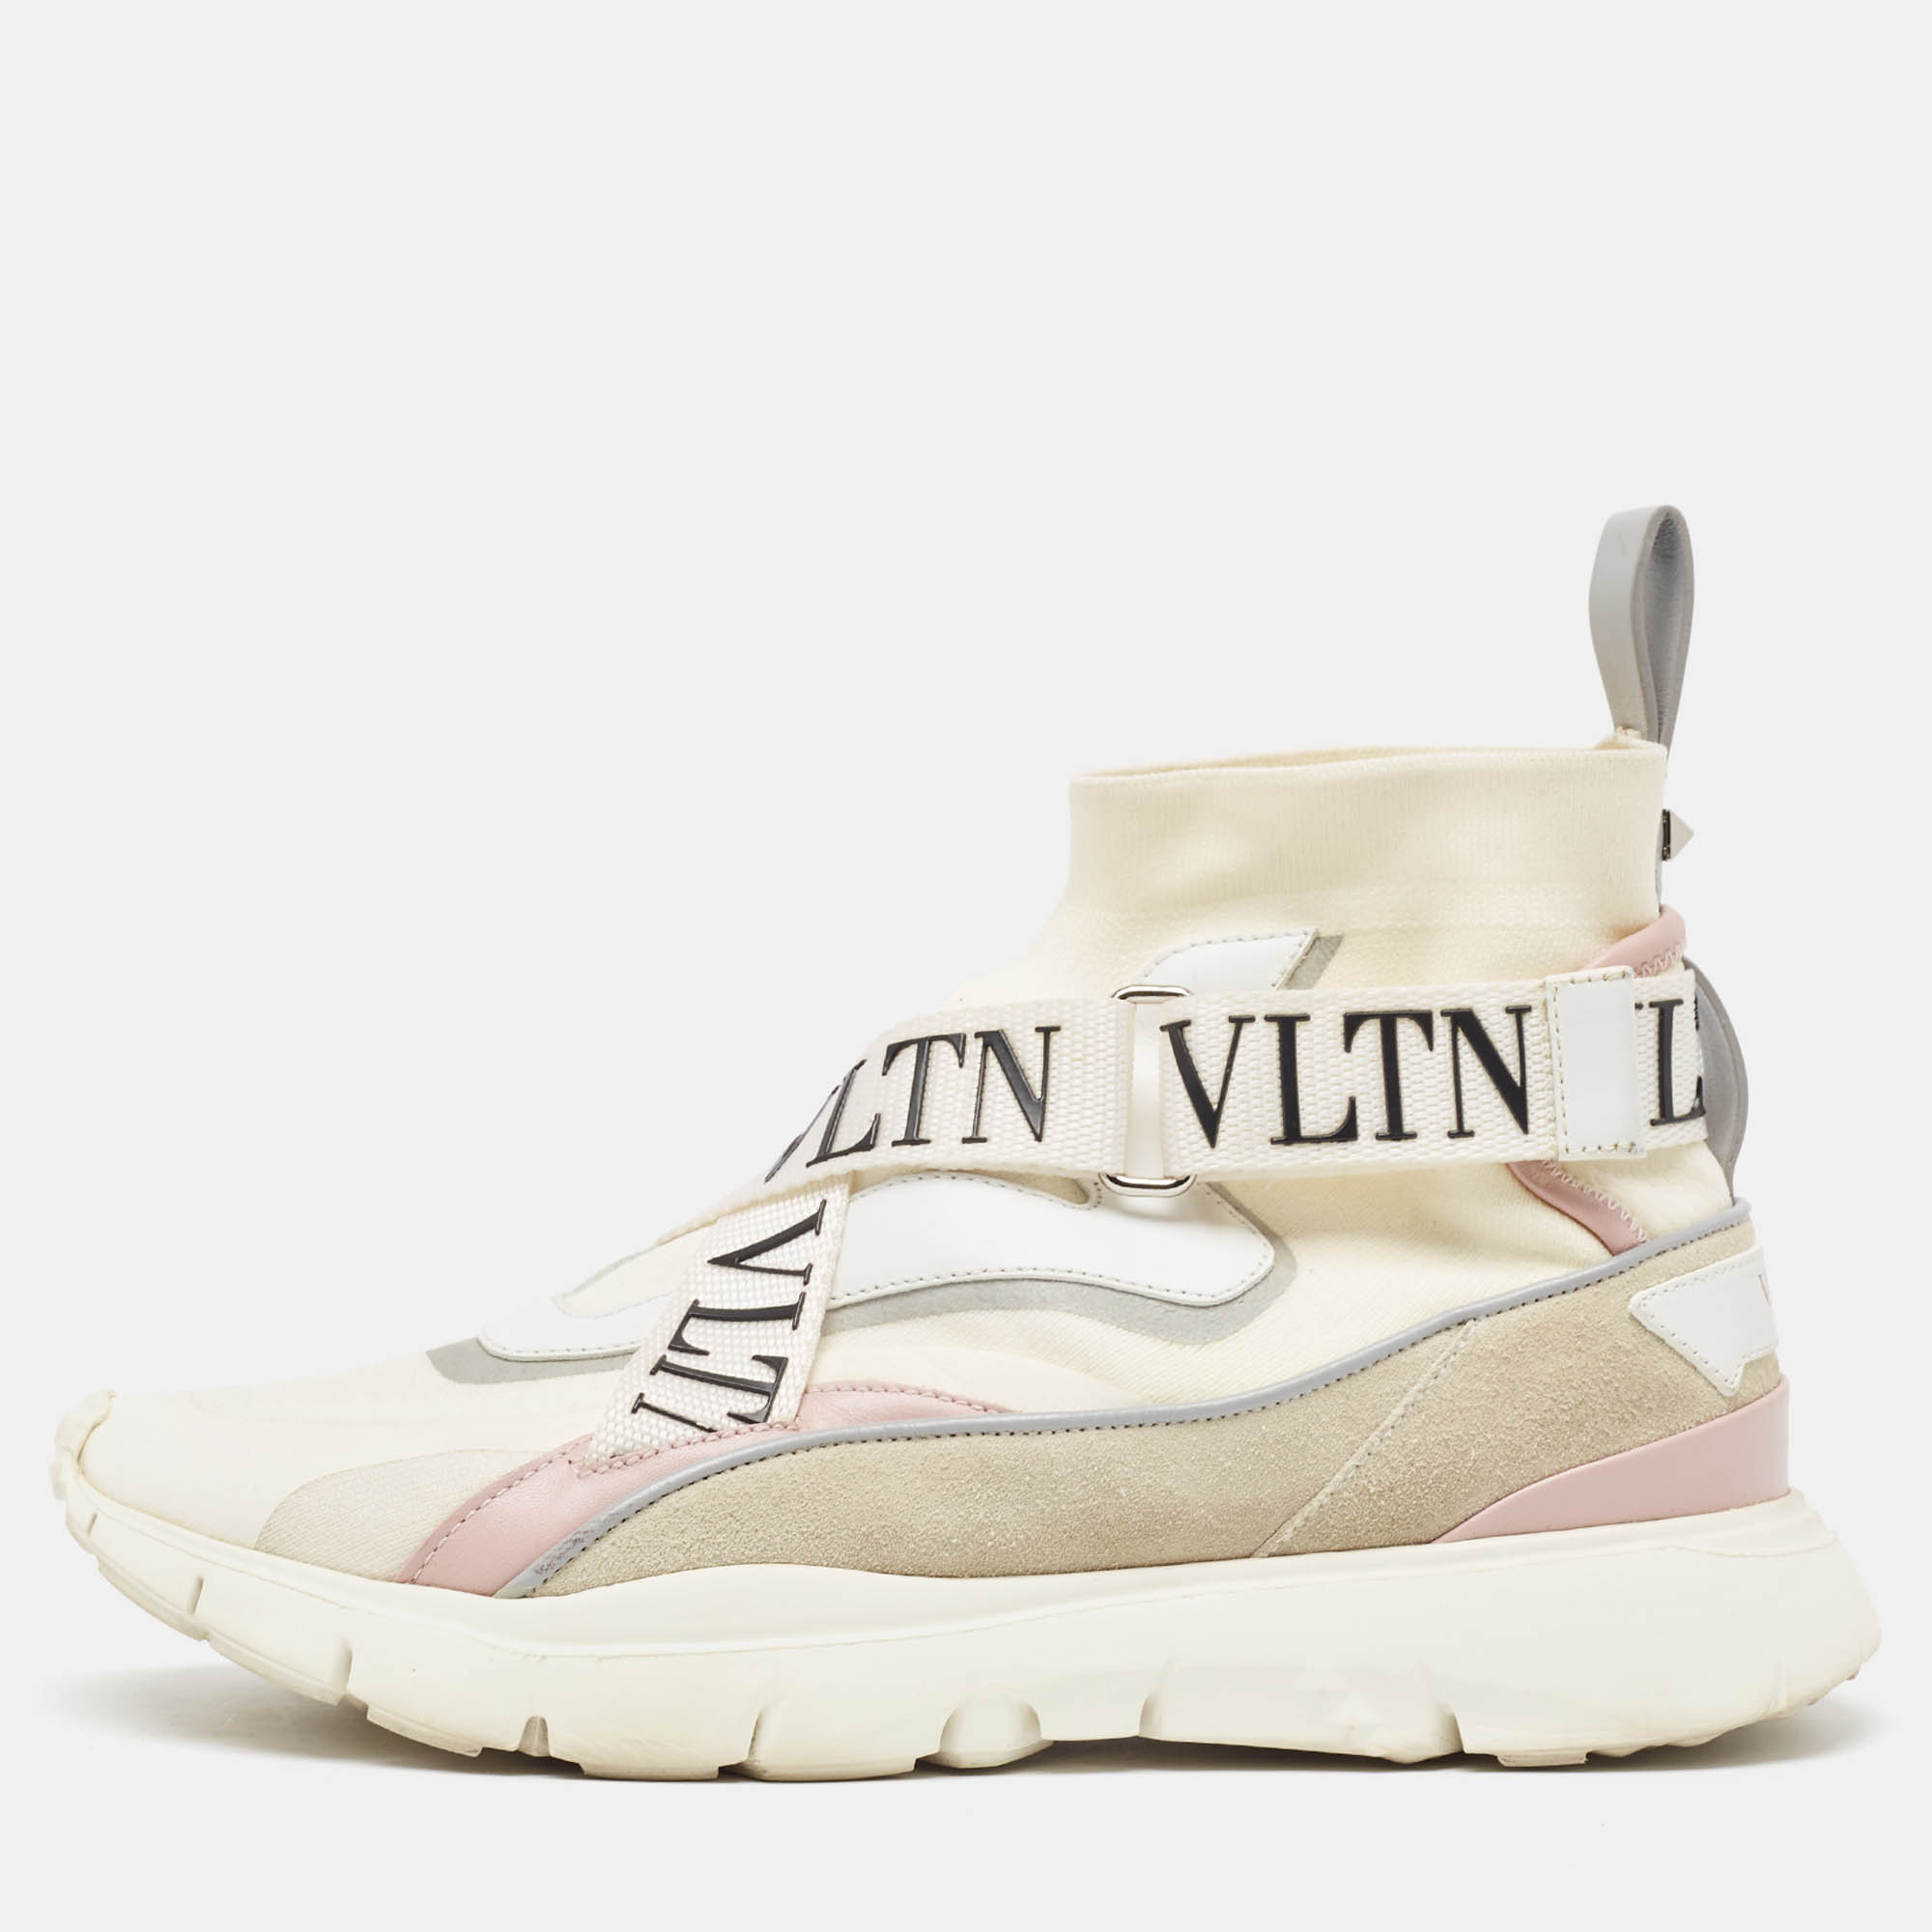 Valentino multicolor suede and fabric vltn heroes sneakers size 37.5